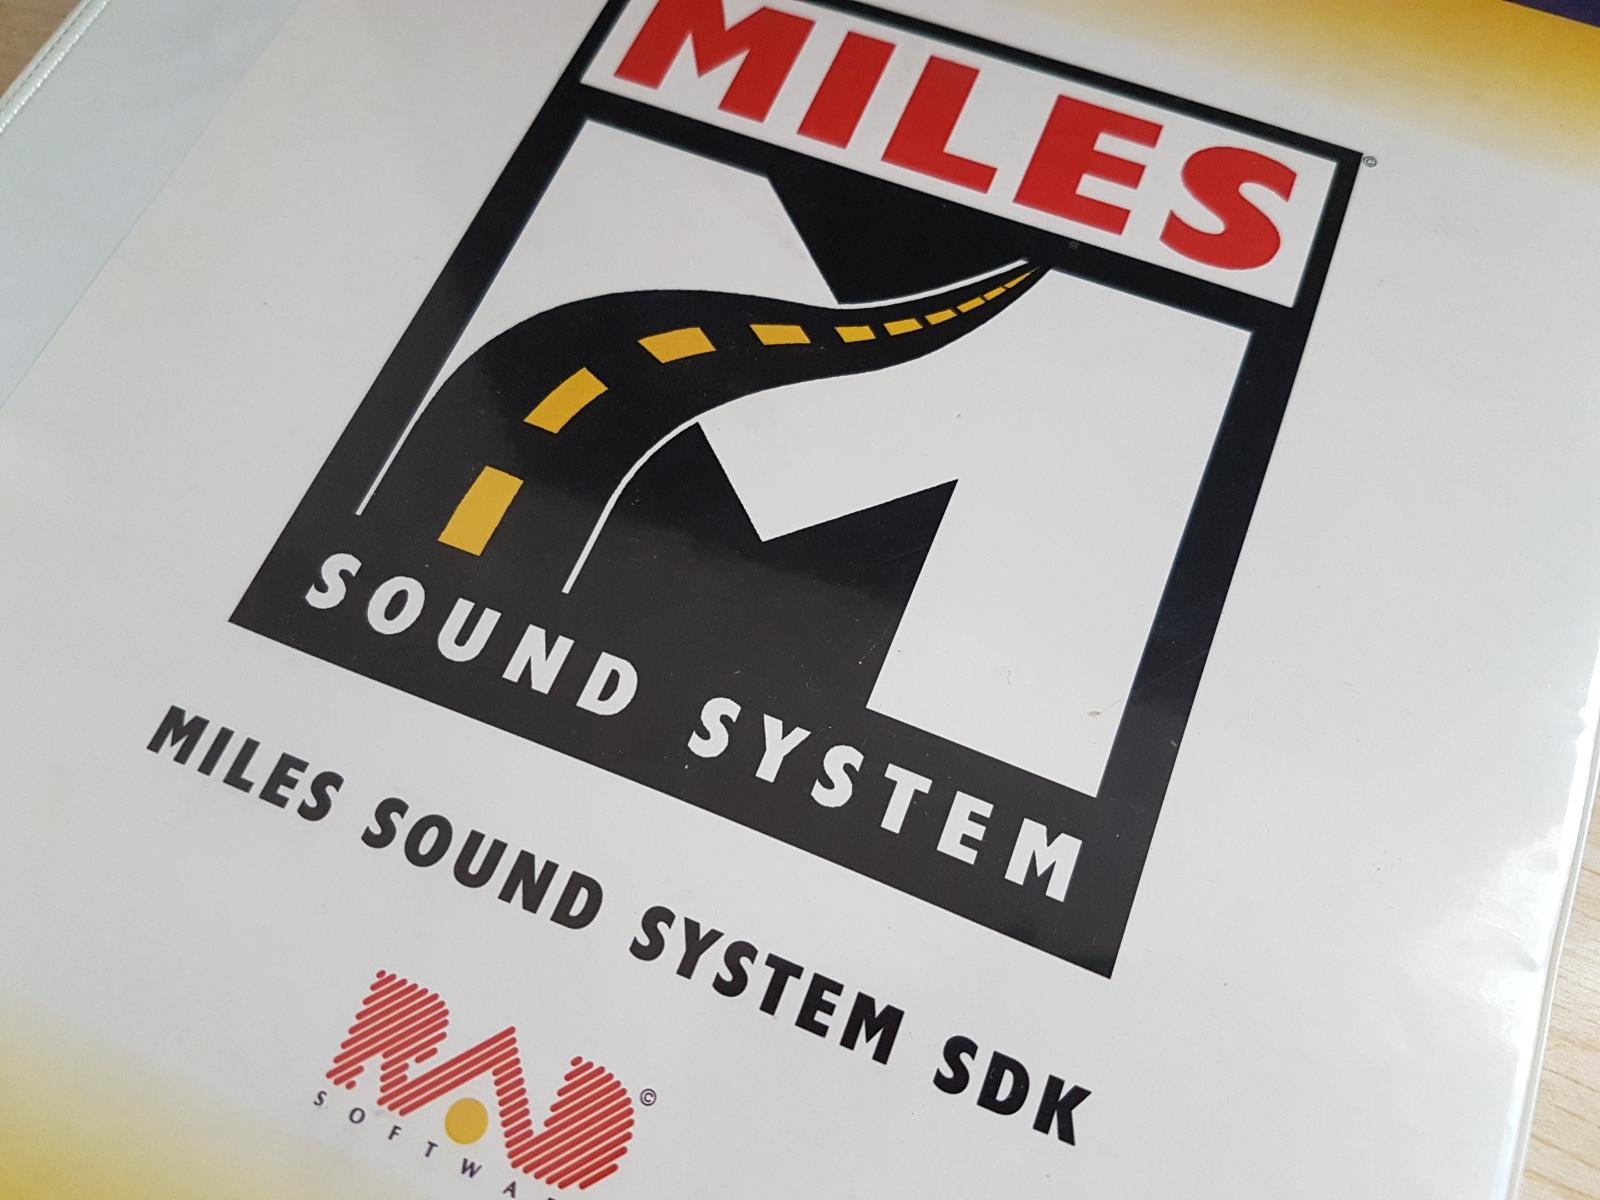 Miles Sound System SDK for DOS and Windows - version 6.0 - Knihy